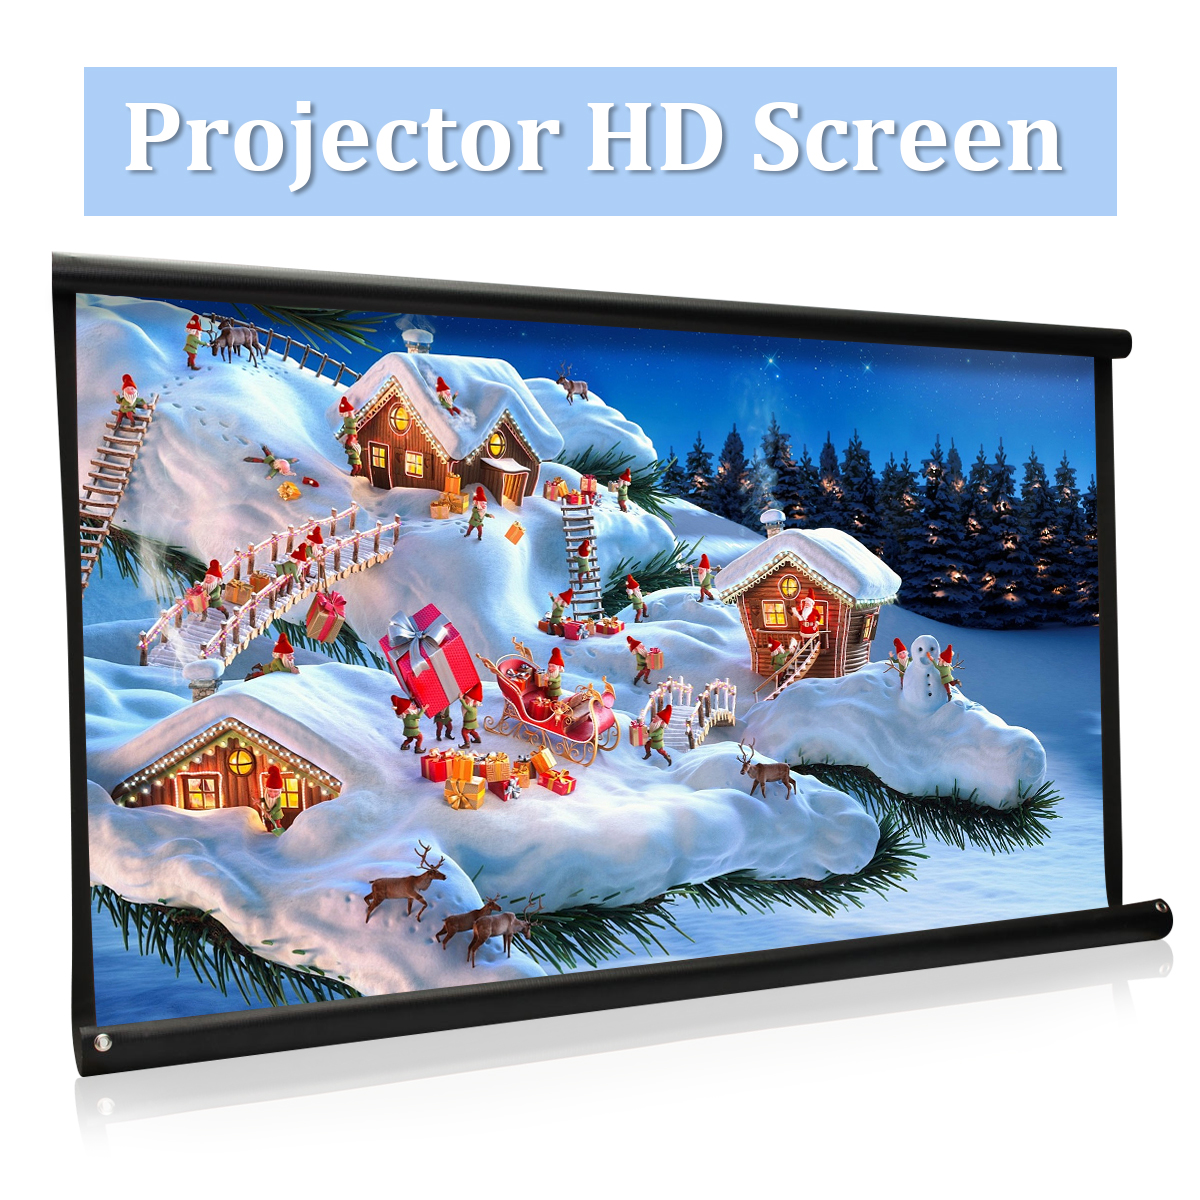 100inch-169-Projector-HD-Screen-Portable-Folded-Front-projection-screen-fabric-with-eyelets-without--1602458-6